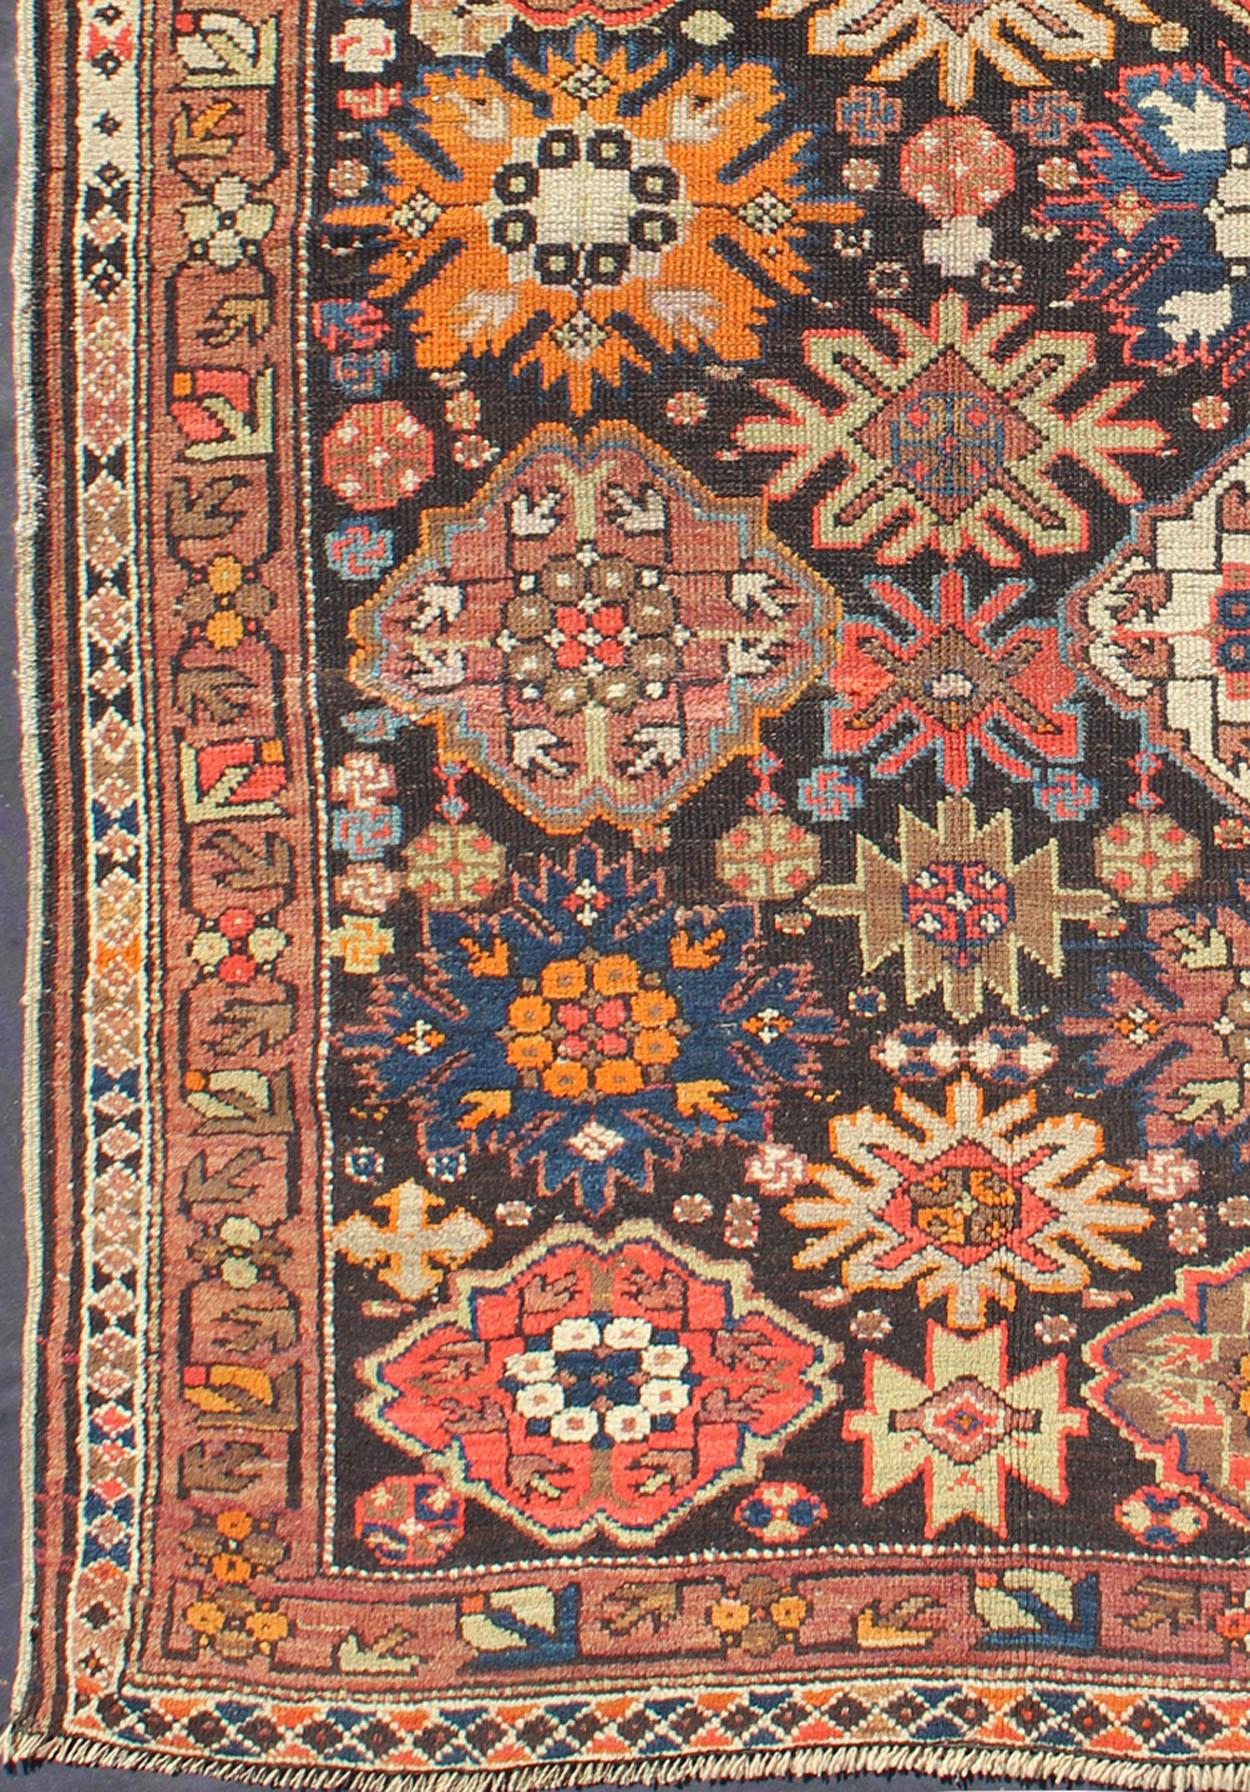 Antique Caucasian Rug with All-Over Multi-Colored in Large All Over Pattern. Large scale geometric boteh Caucasian Rug. Elegant All-Over Antique Caucasian Rug. Keivan Woven Arts / rug 13-0915, country of origin / type: Russia / Kazak, circa late